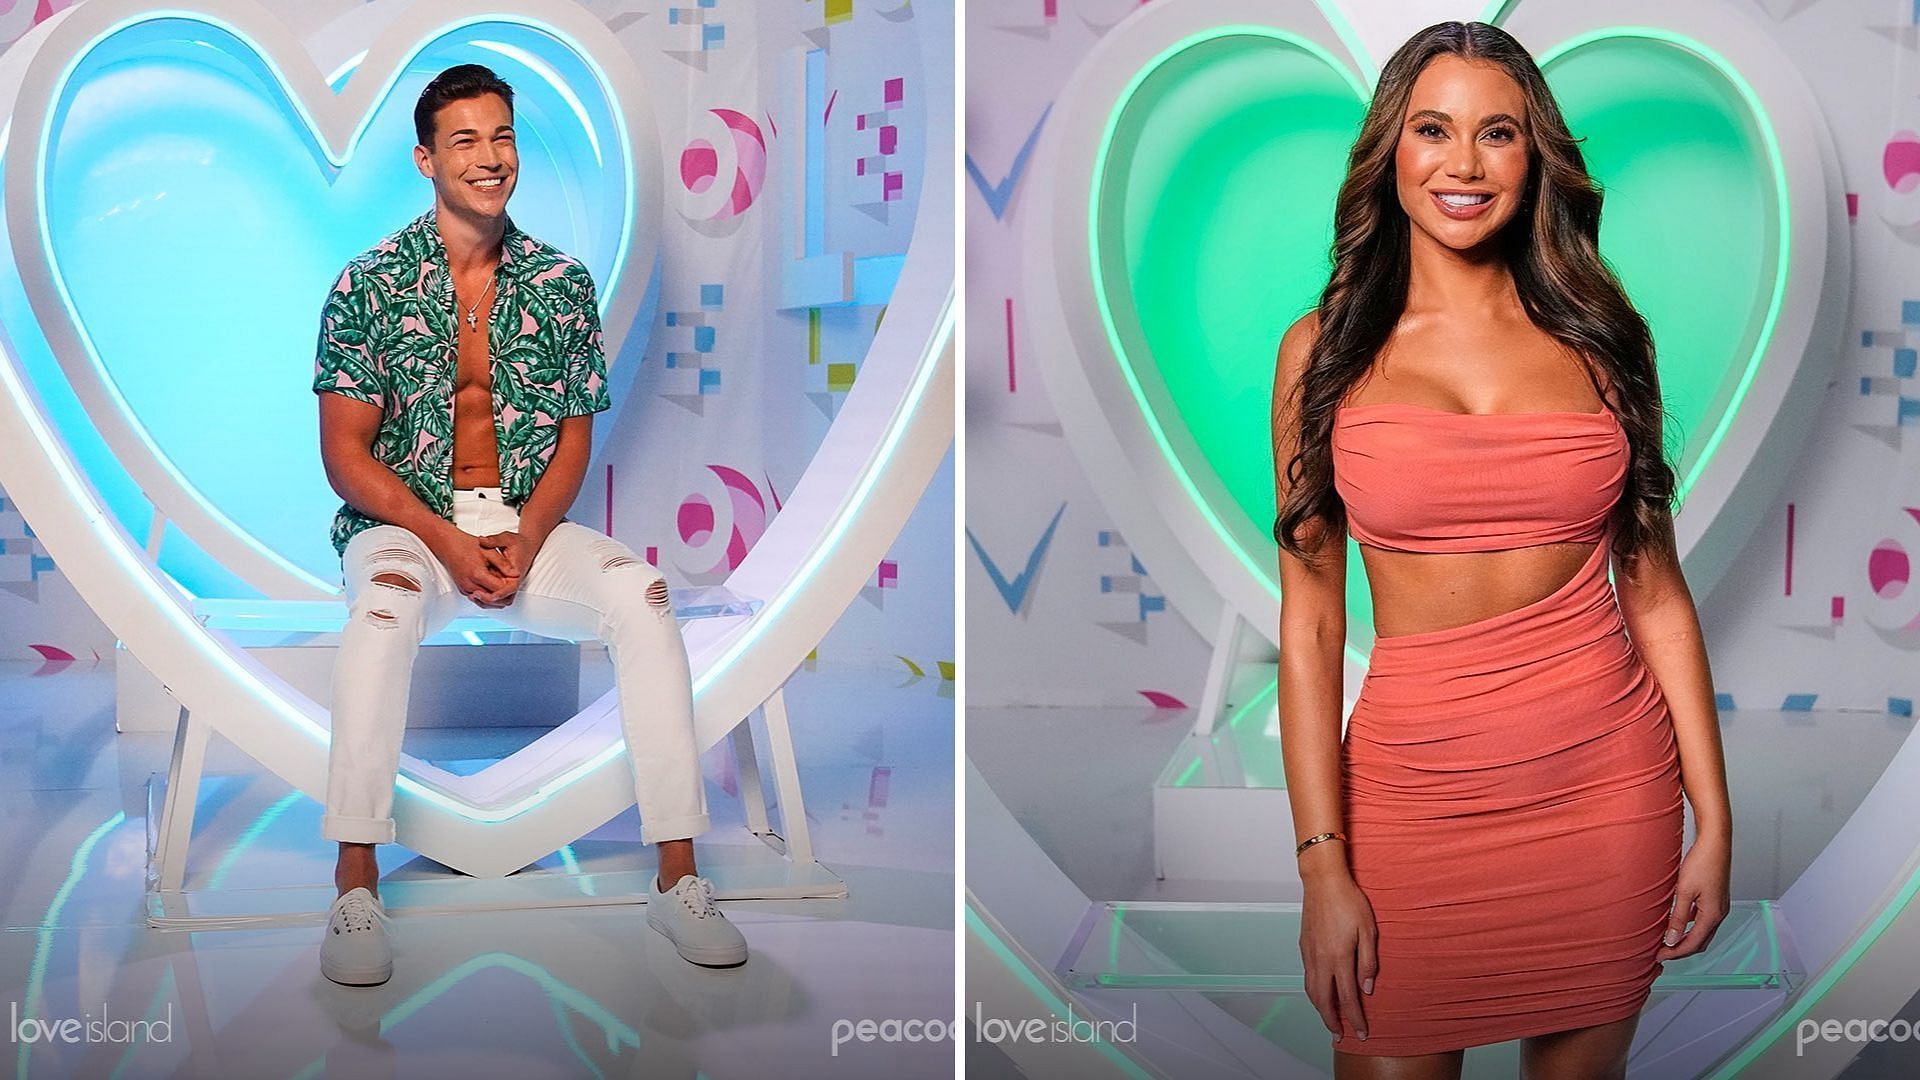 Fans skeptical about Love Island USA couple Andy and Courtney (Image via loveislandusa/Instagram)